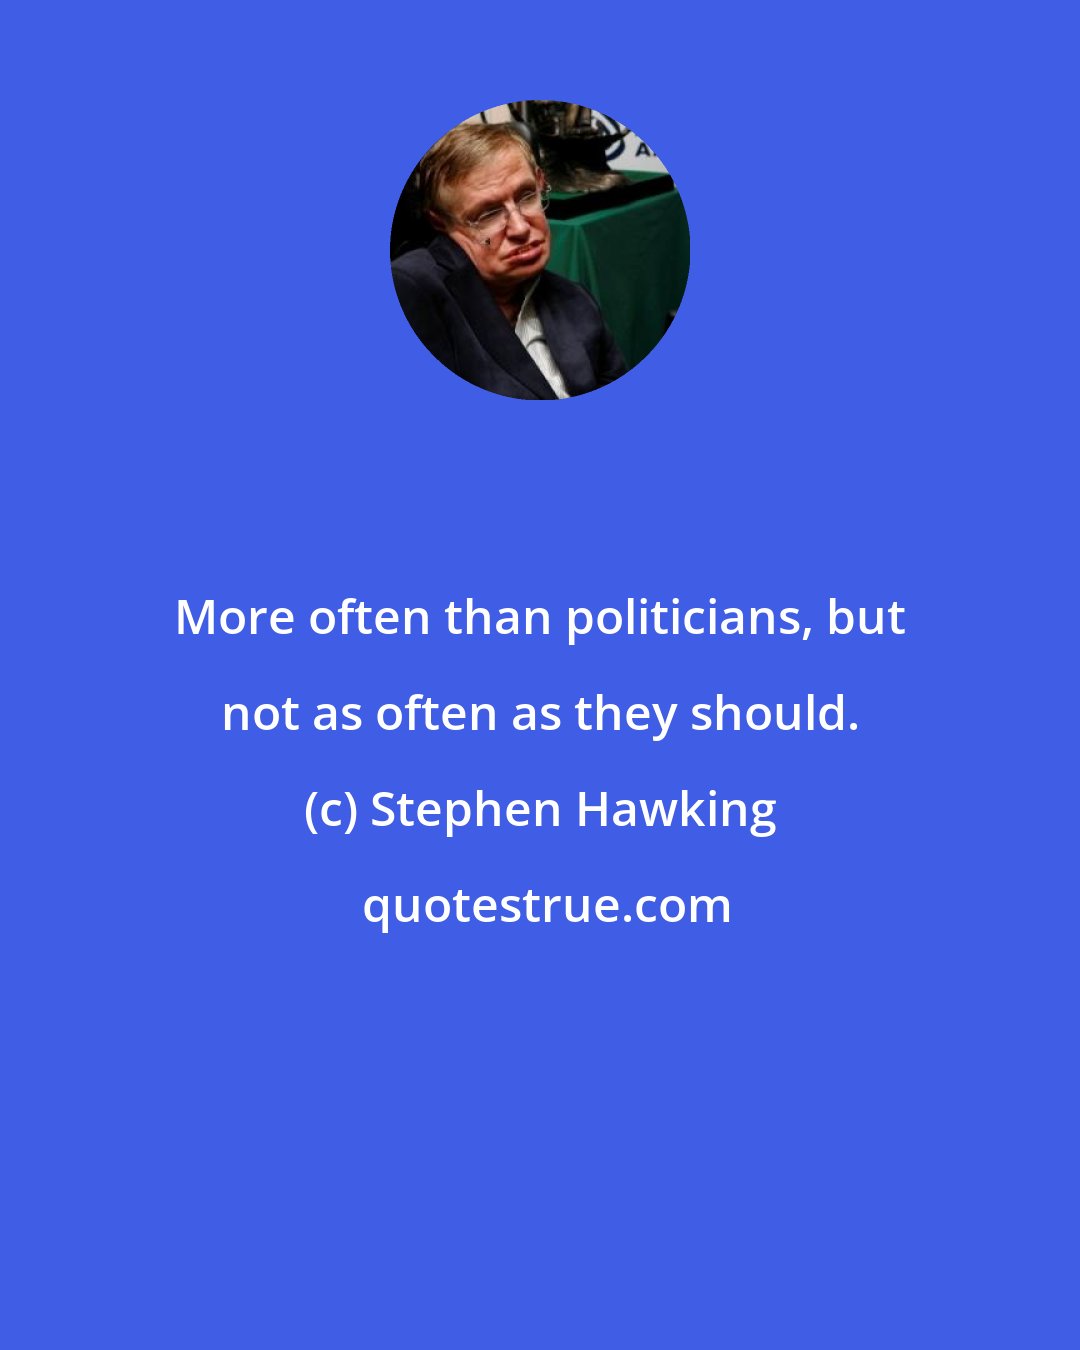 Stephen Hawking: More often than politicians, but not as often as they should.